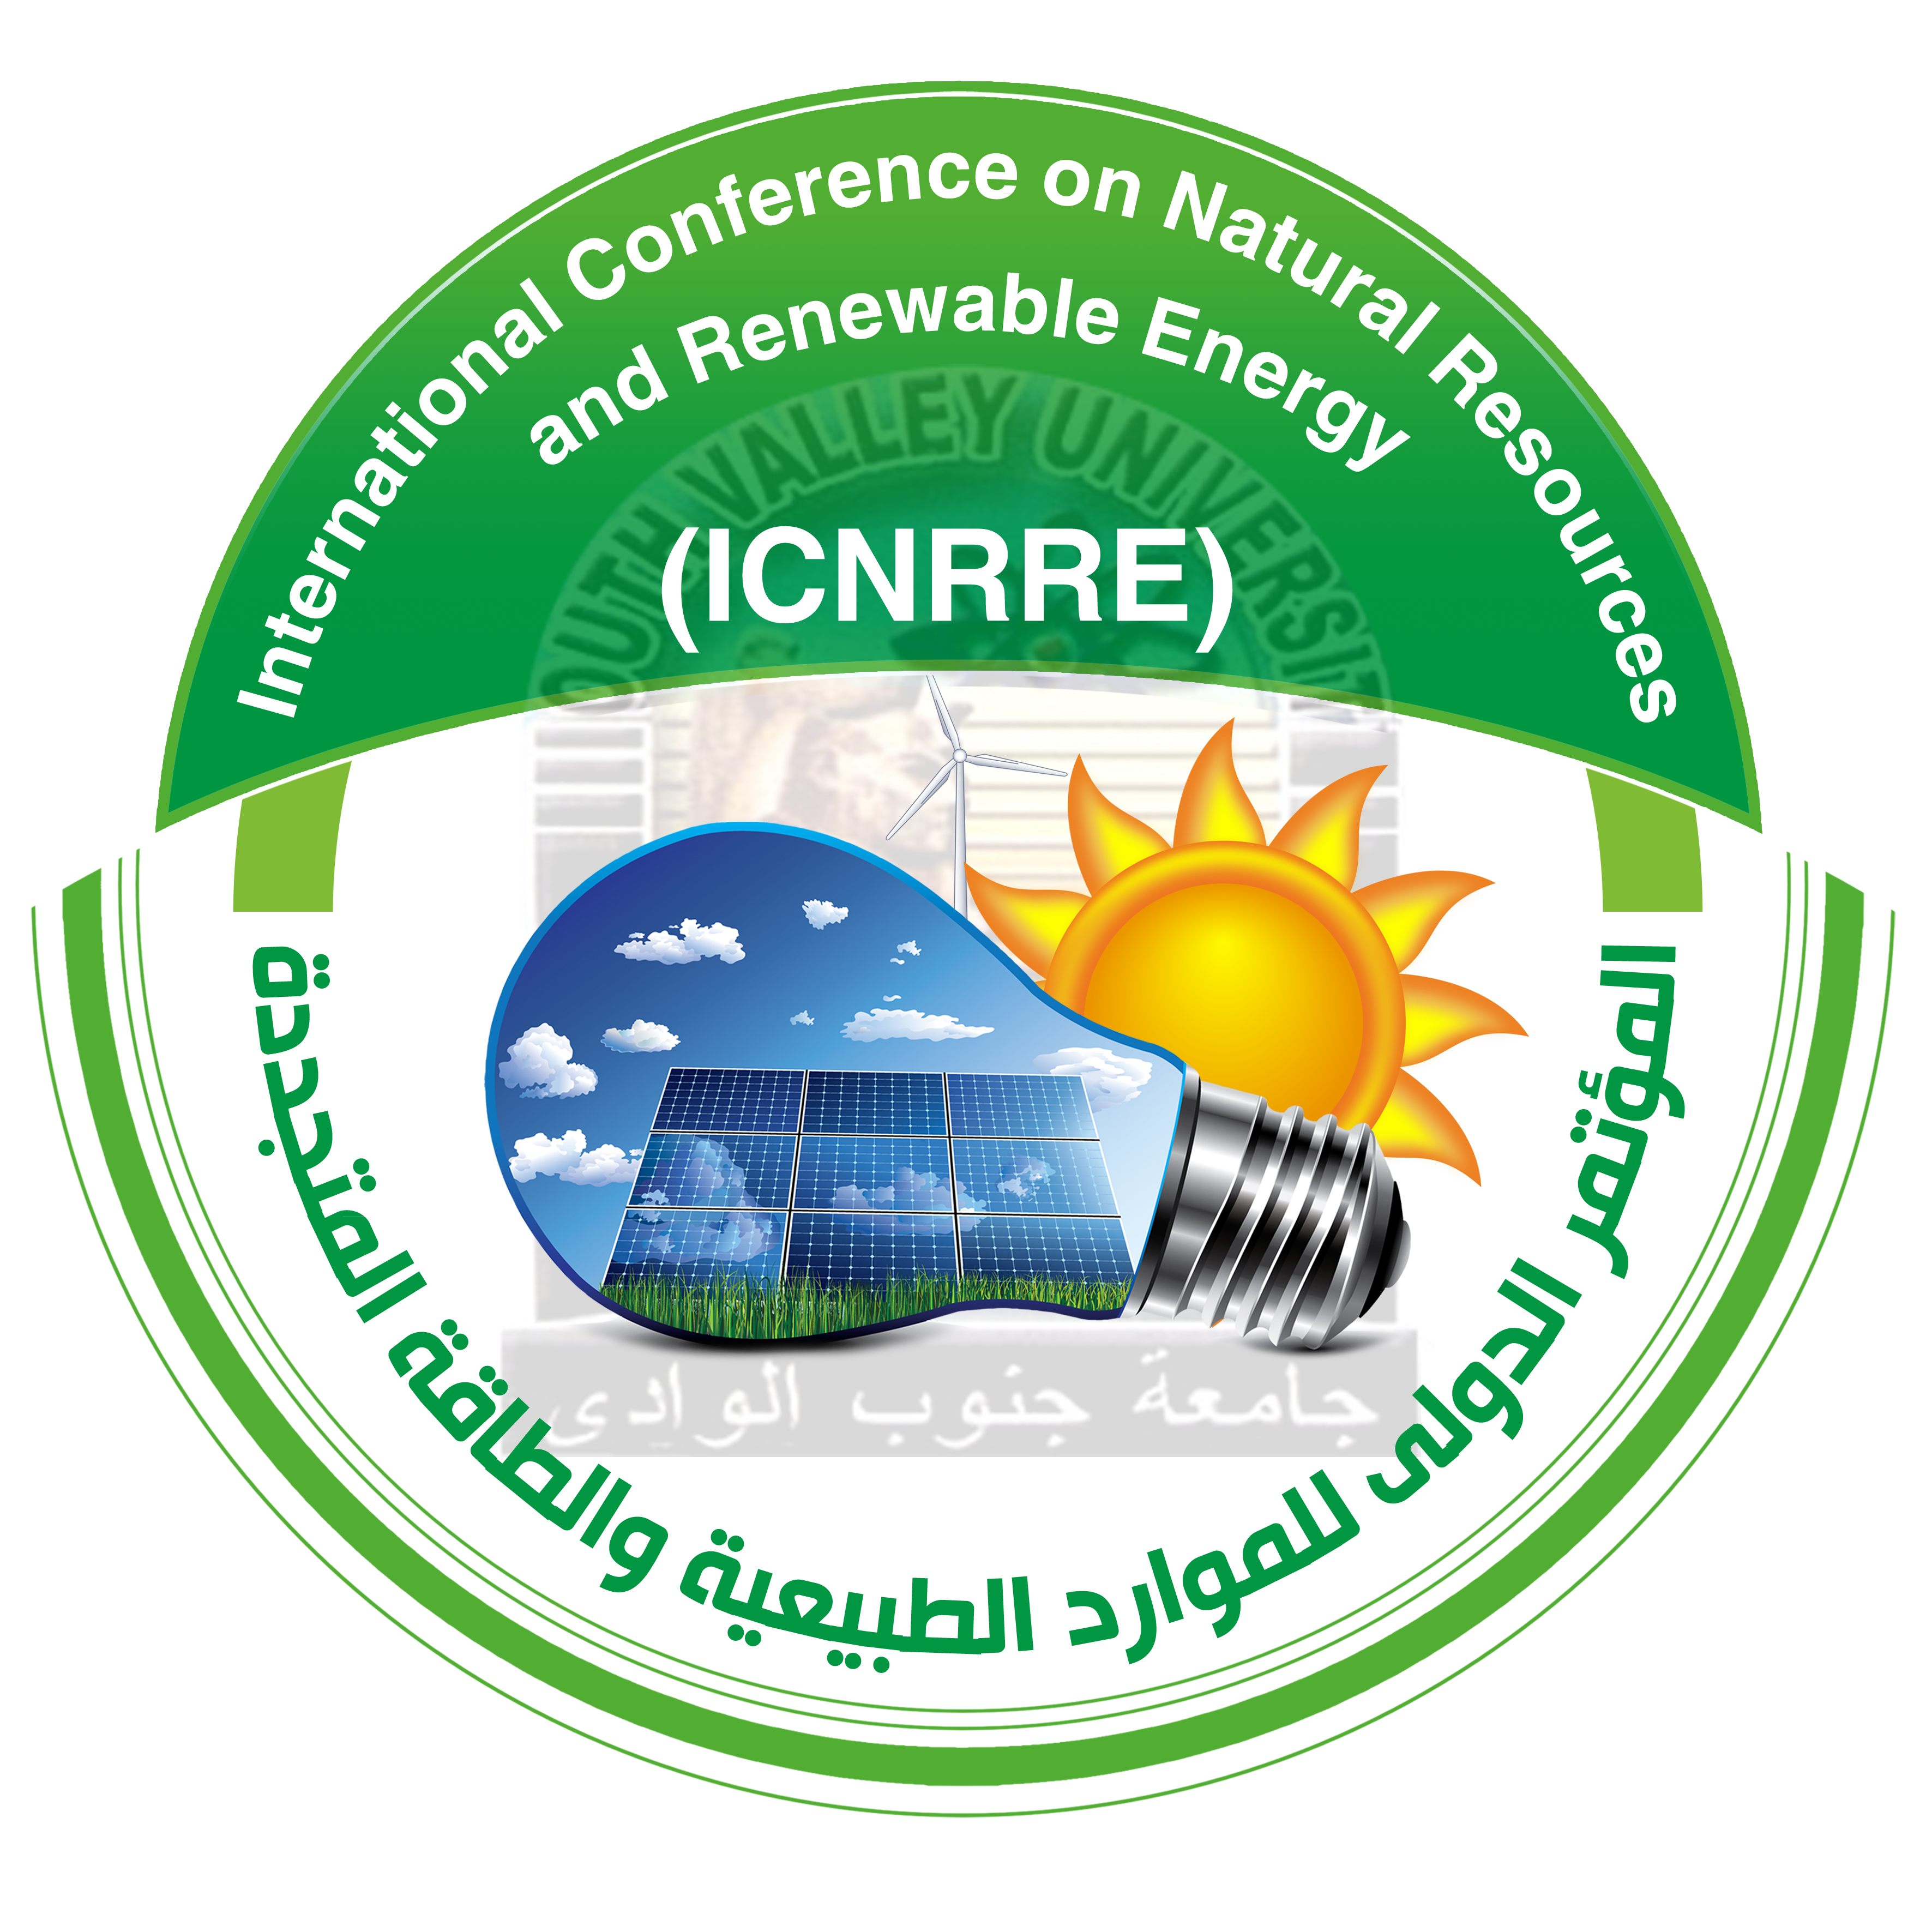 The objectives of The 1st International Conference On Natural Resources And Renewable Energy (Icnrre-I-2017) Will Be:
- A comprehensive presentation of the state-of-the-art as well as research development and challenges in the Natural Resources and Renewable Energy.
- Discussion of the topics such as new materials, novel device concepts and applications.
- Analysis of the opportunities and barriers hindering Renewable Energy development in the world and in Egypt.